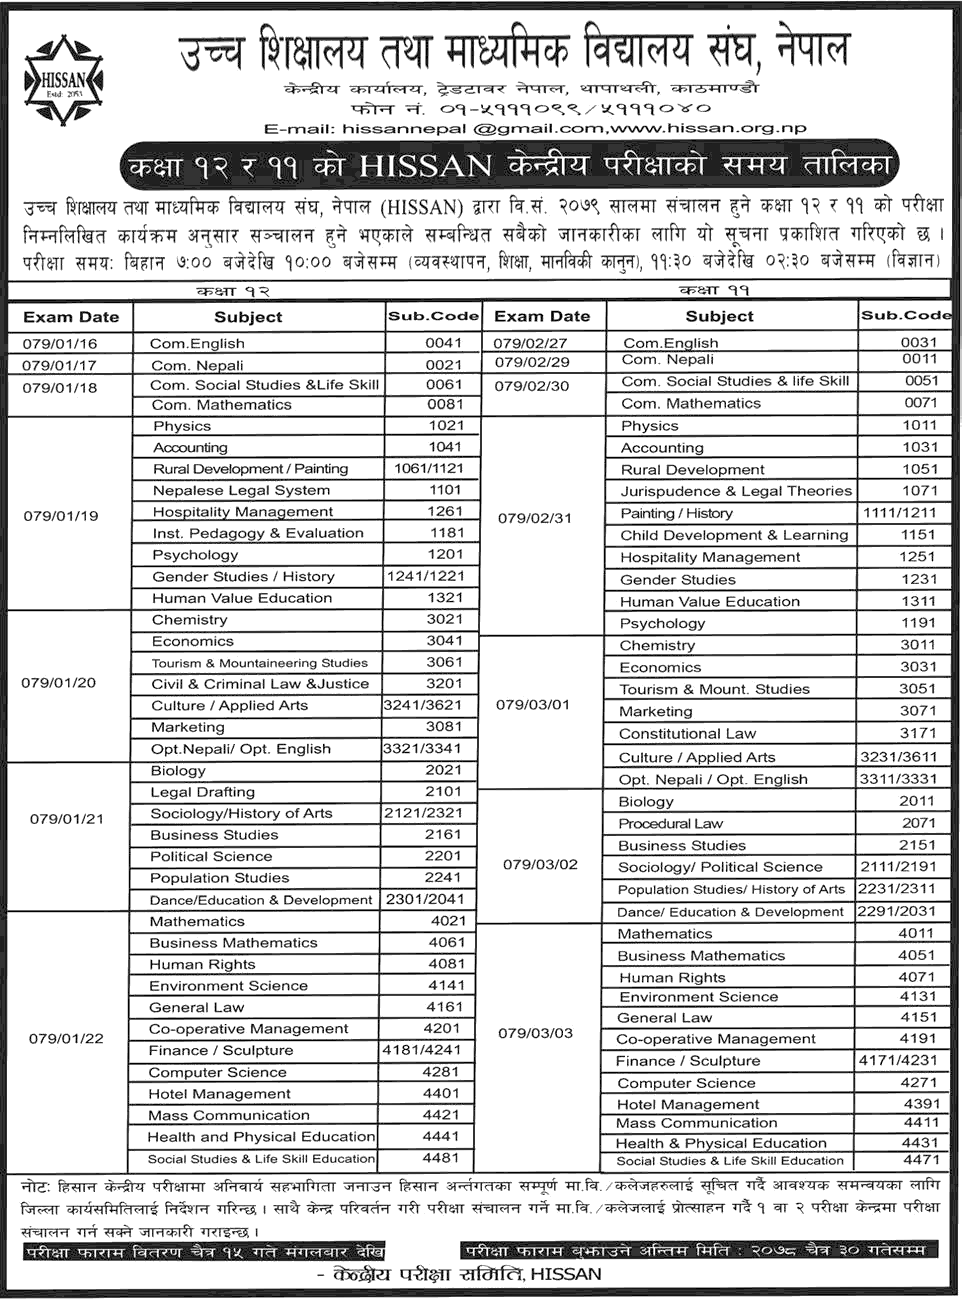 HISSAN Central Examination Schedule (Routine) for Class 12 and 11